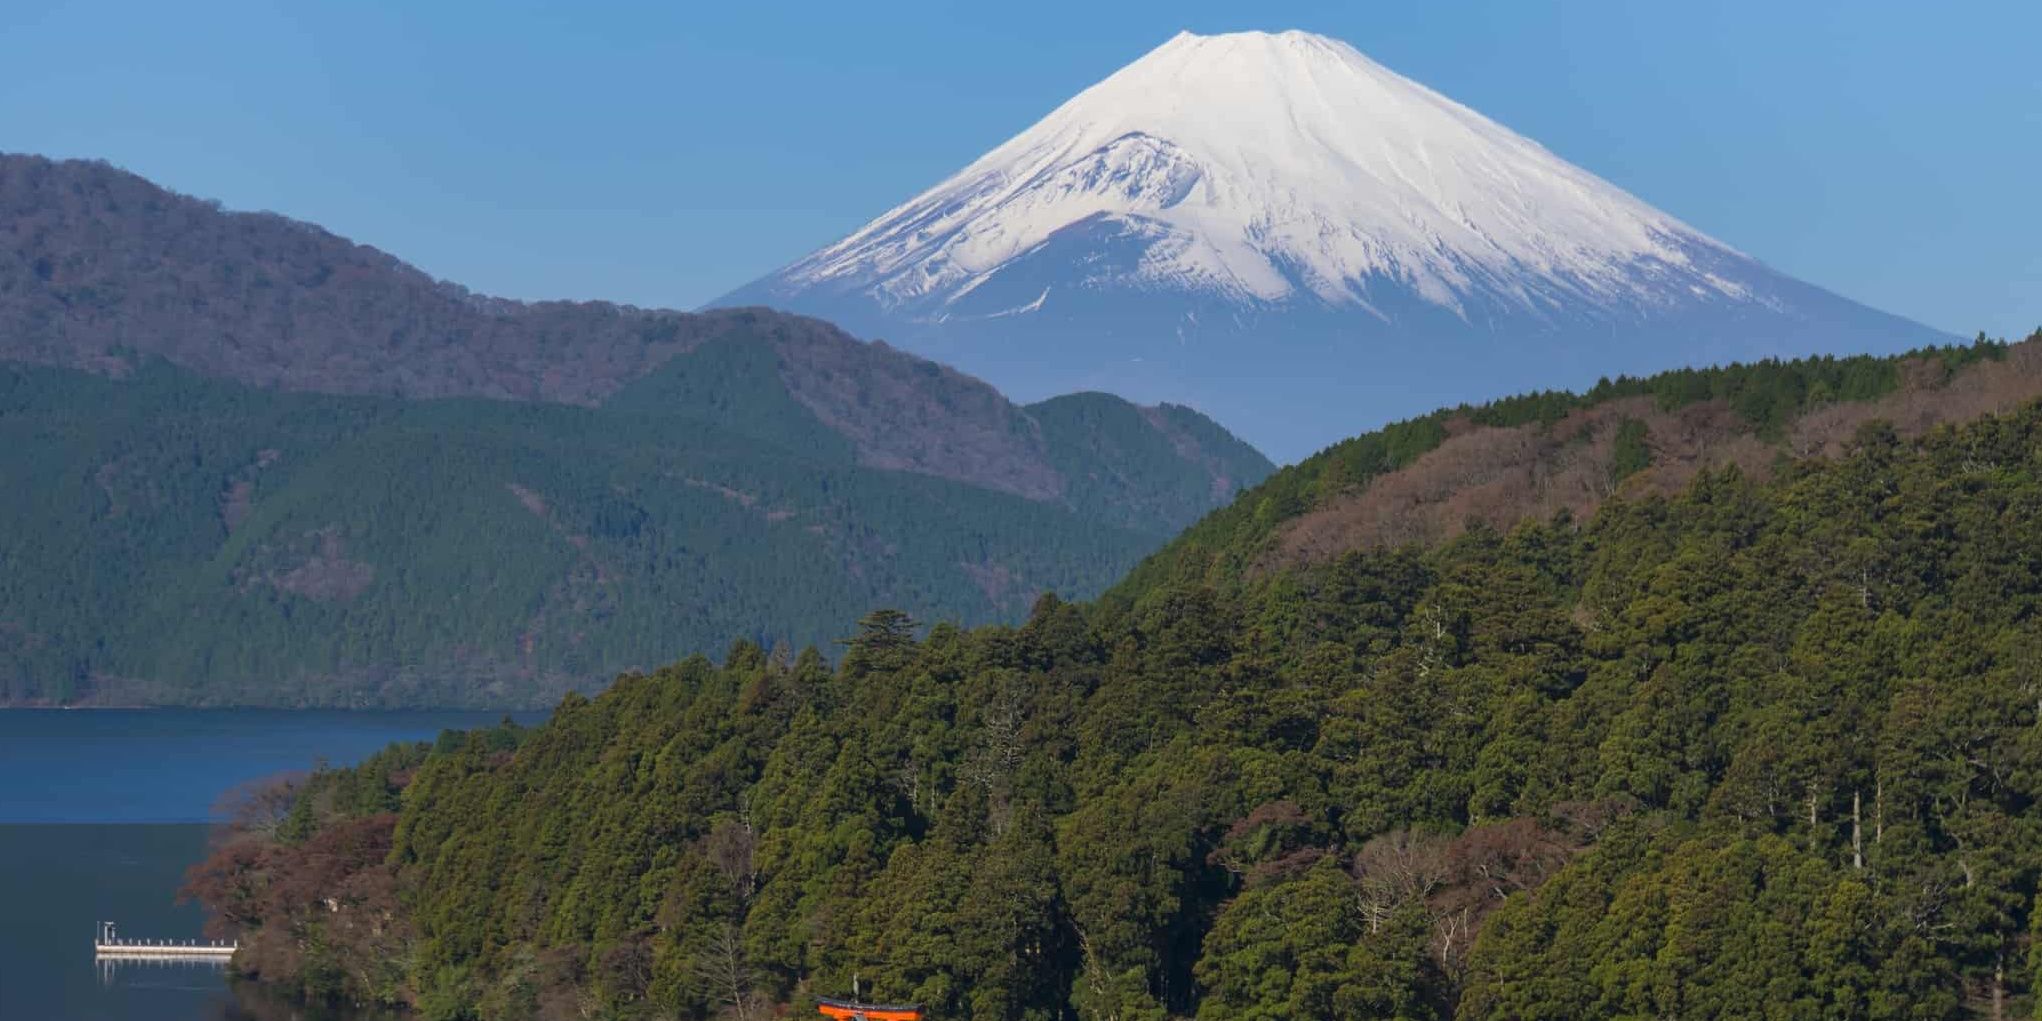 Hakone, Japan, which Viridian City in Pokemon is based on.